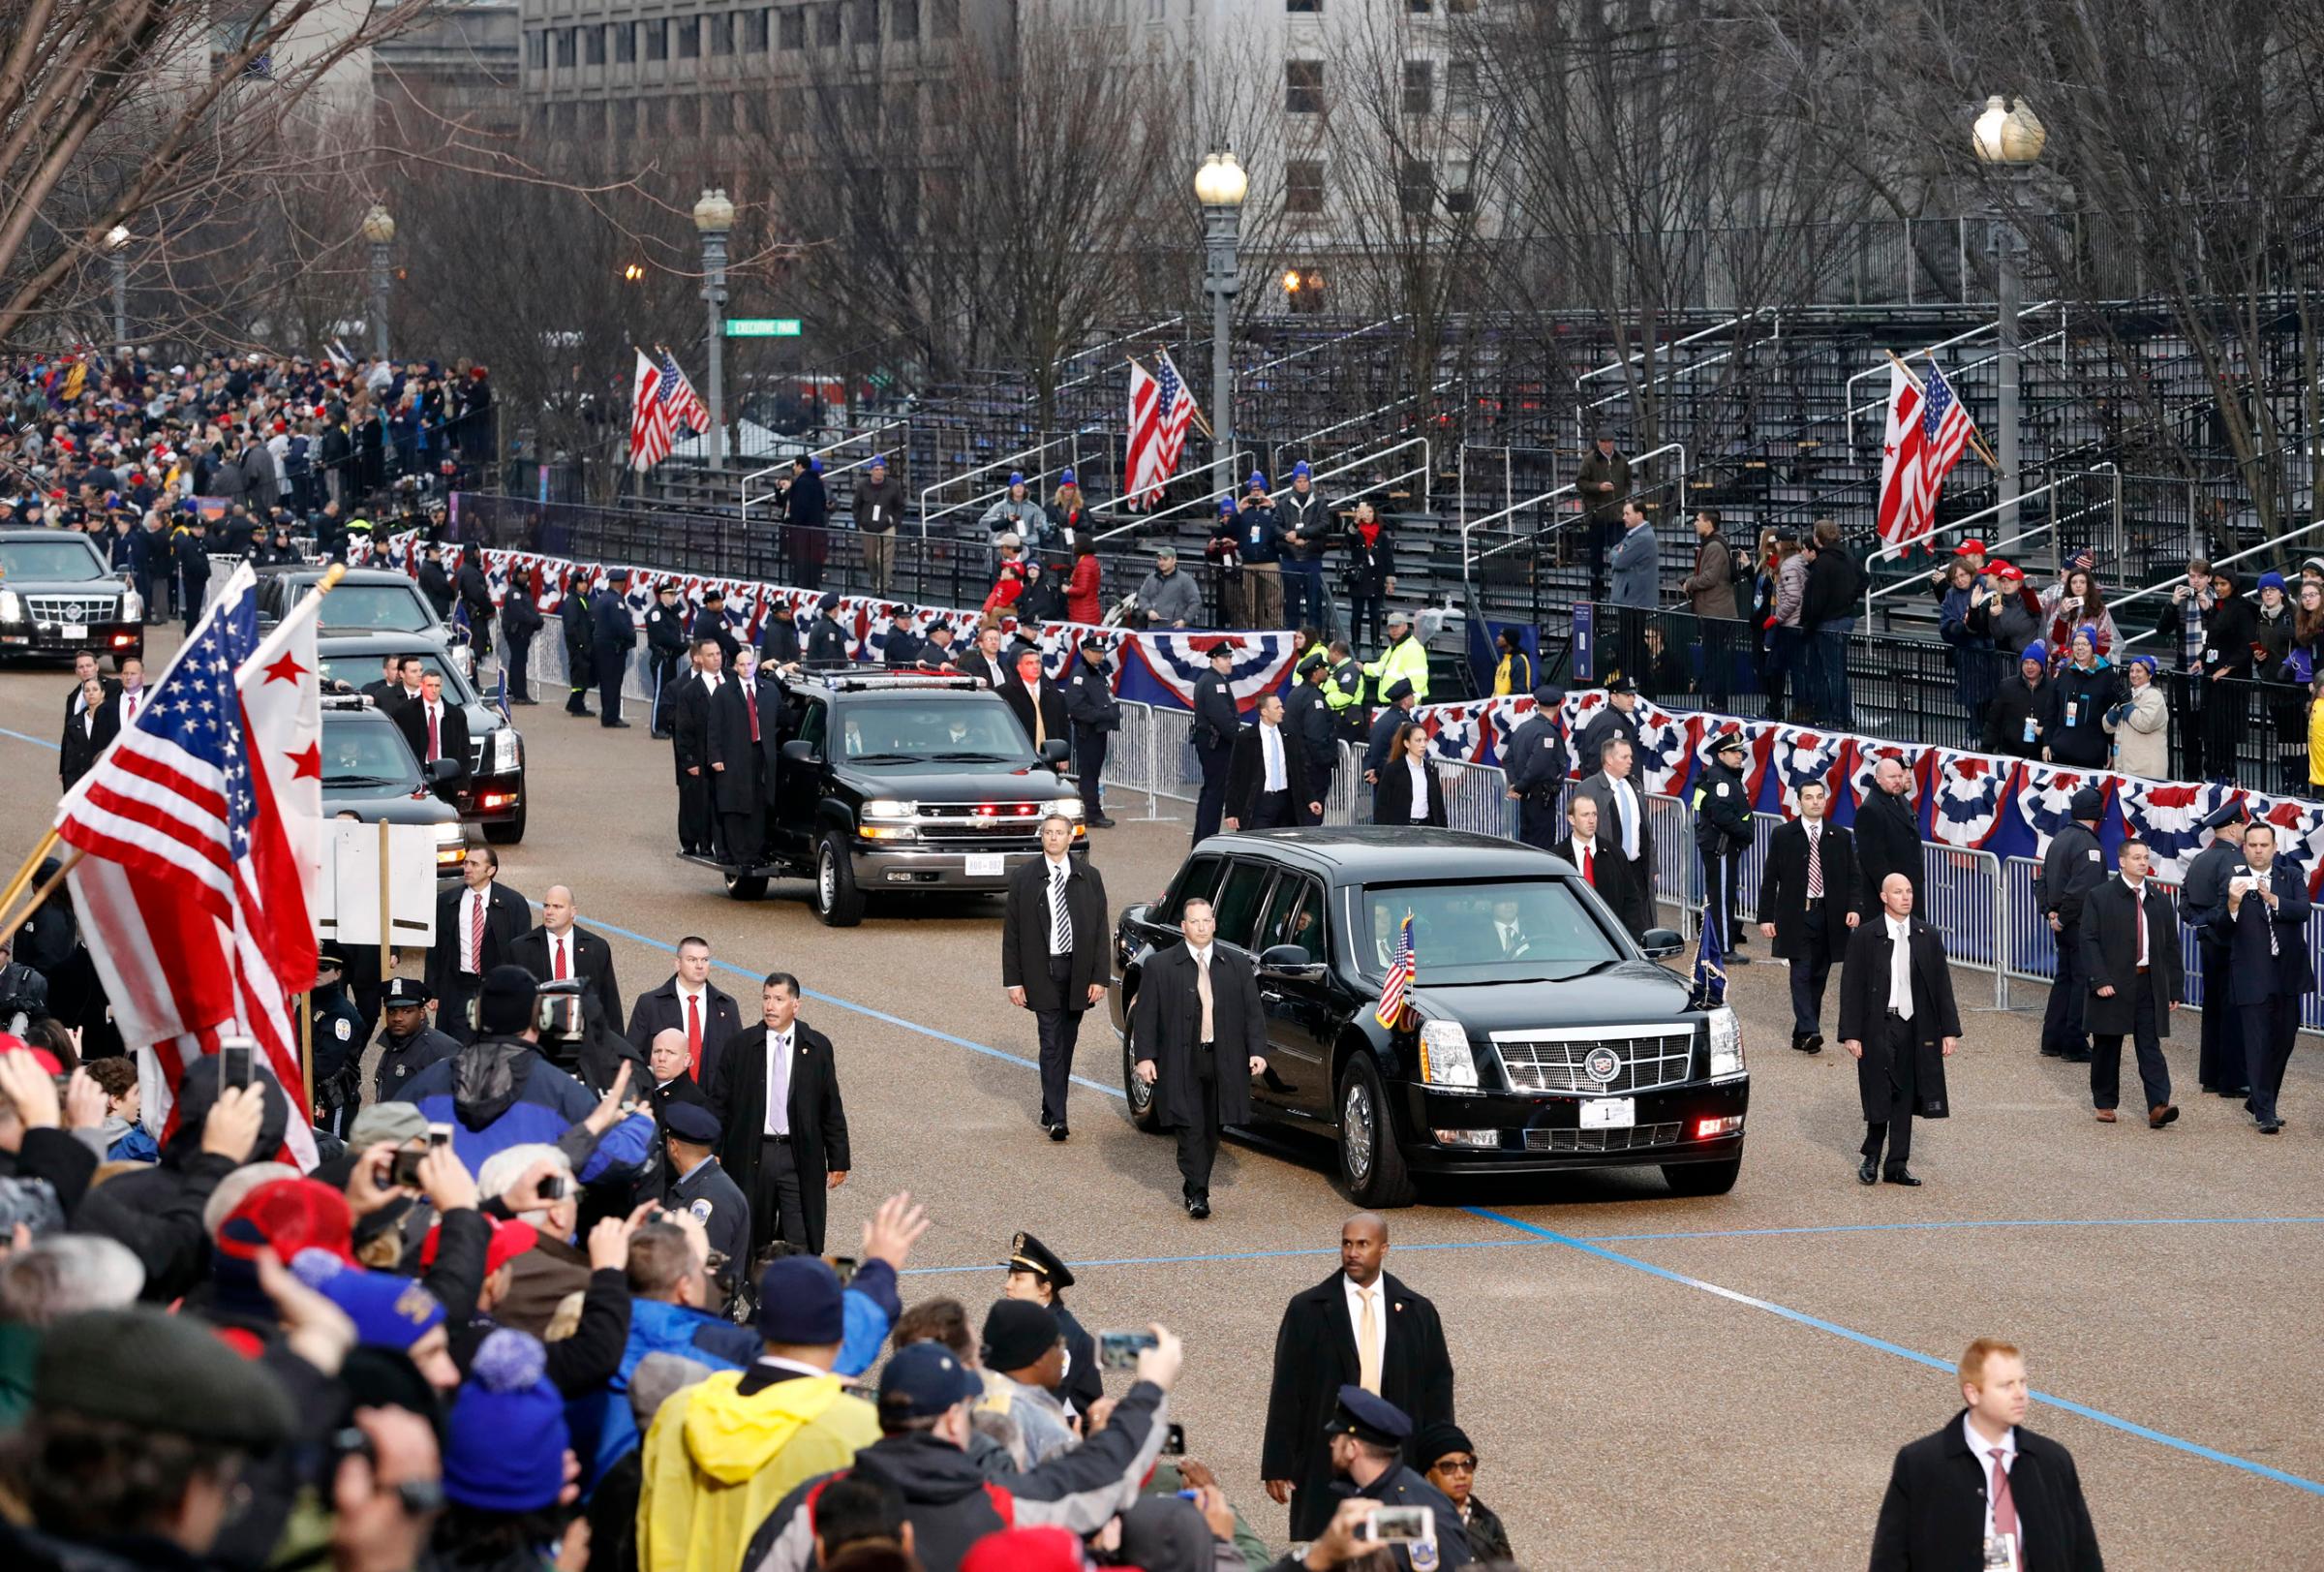 President Donald Trump's armored limousine is escorted for the inaugural parade in Washington DC, on Jan. 20, 2017.